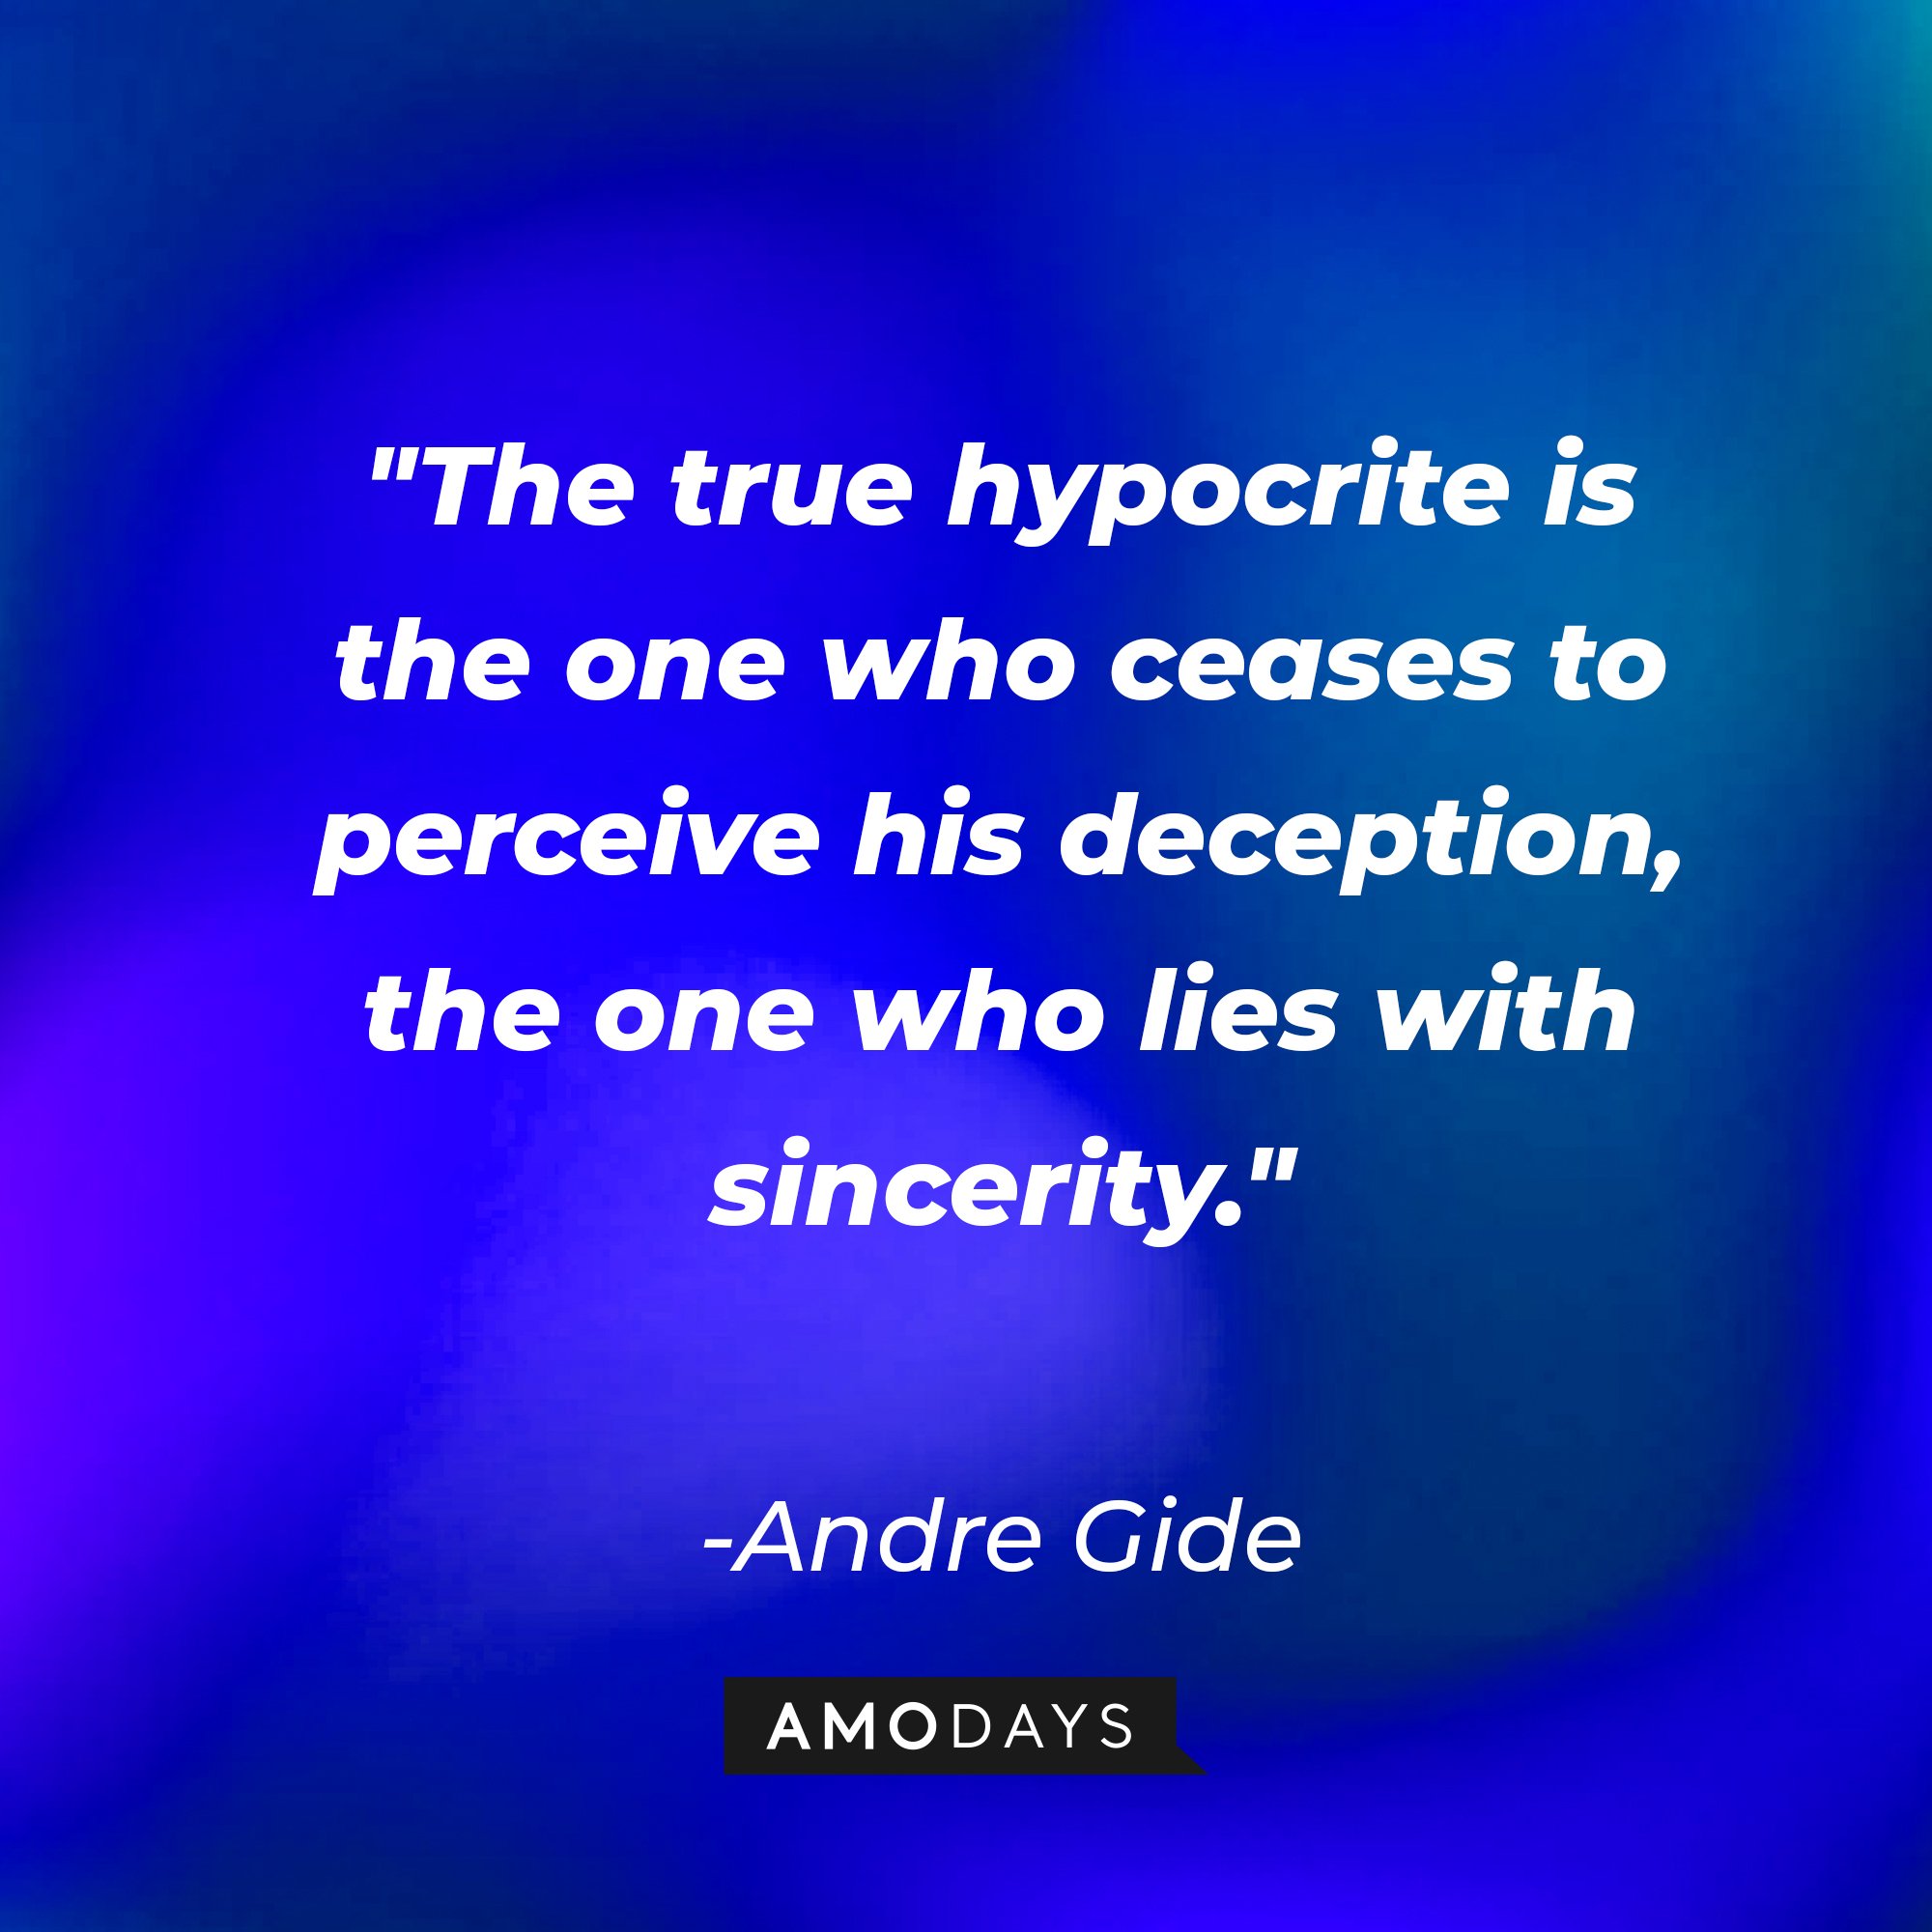 Andre Gide's quote:\\\\\\\\\\\\\\\\u00a0"The true hypocrite is the one who ceases to perceive his deception, the one who lies with sincerity."\\\\\\\\\\\\\\\\u00a0| Image: AmoDays